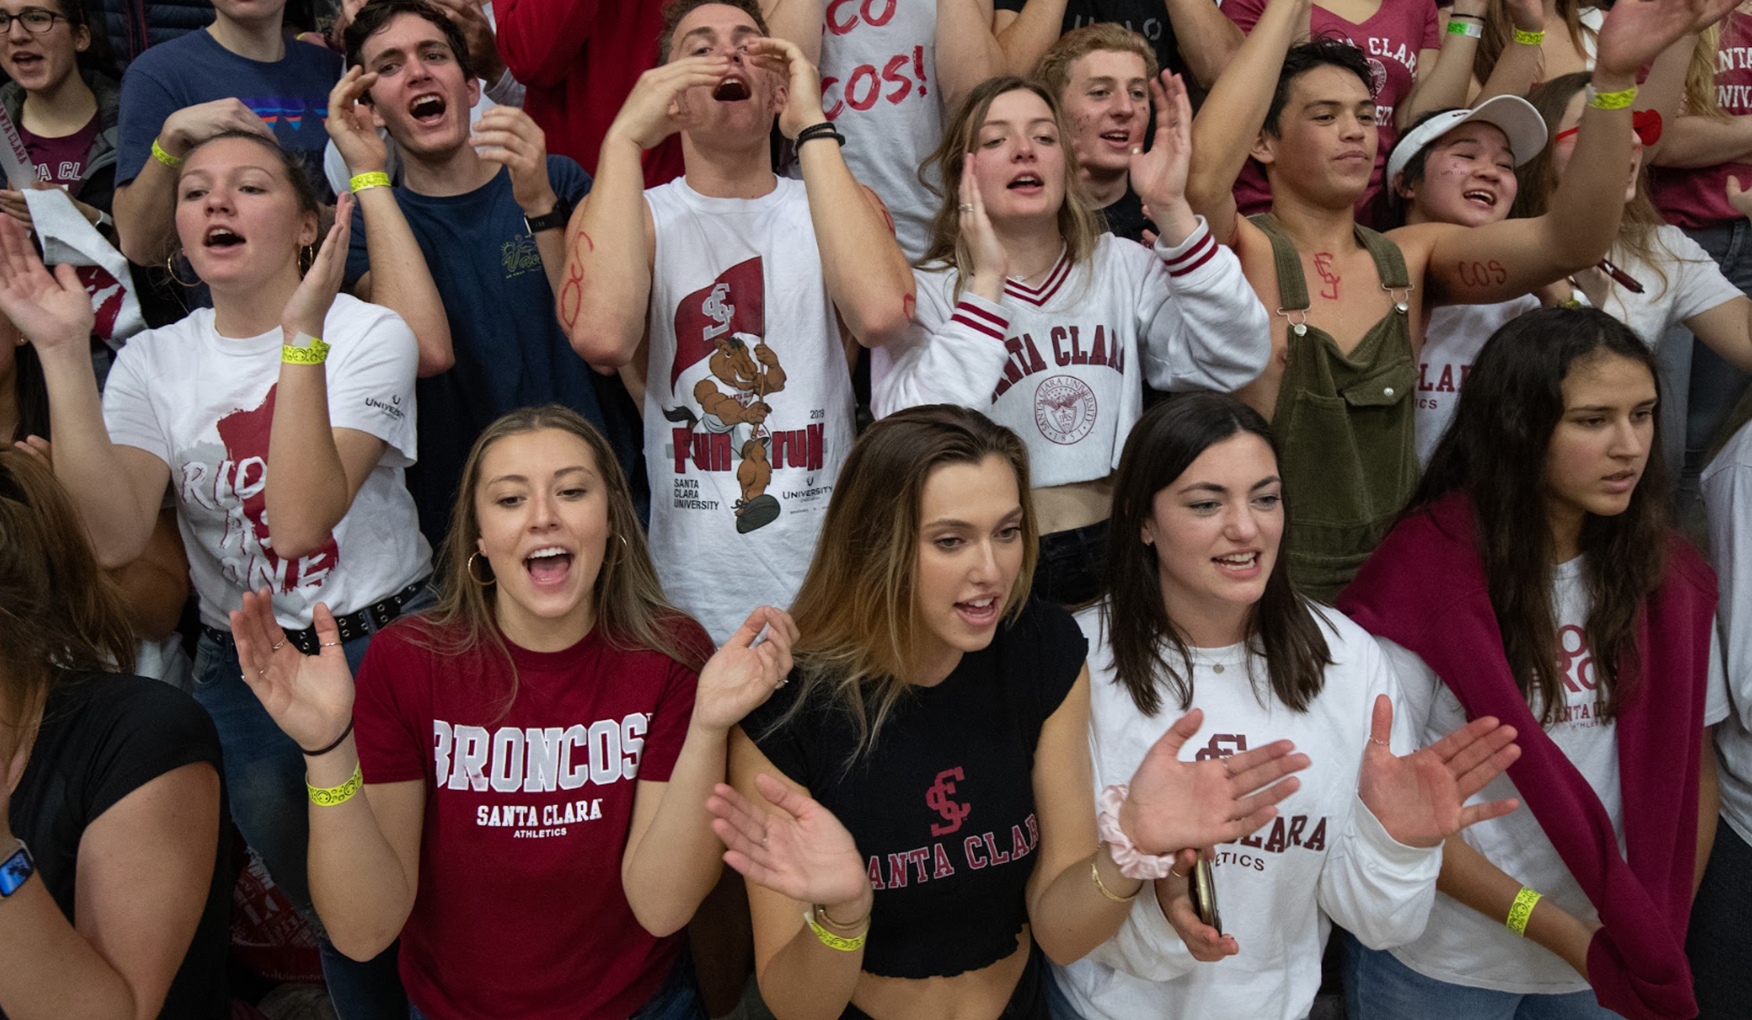 Energetic Santa Clara University students clad in school colors chant and clap in the stands at a sporting event, displaying school spirit and camaraderie.